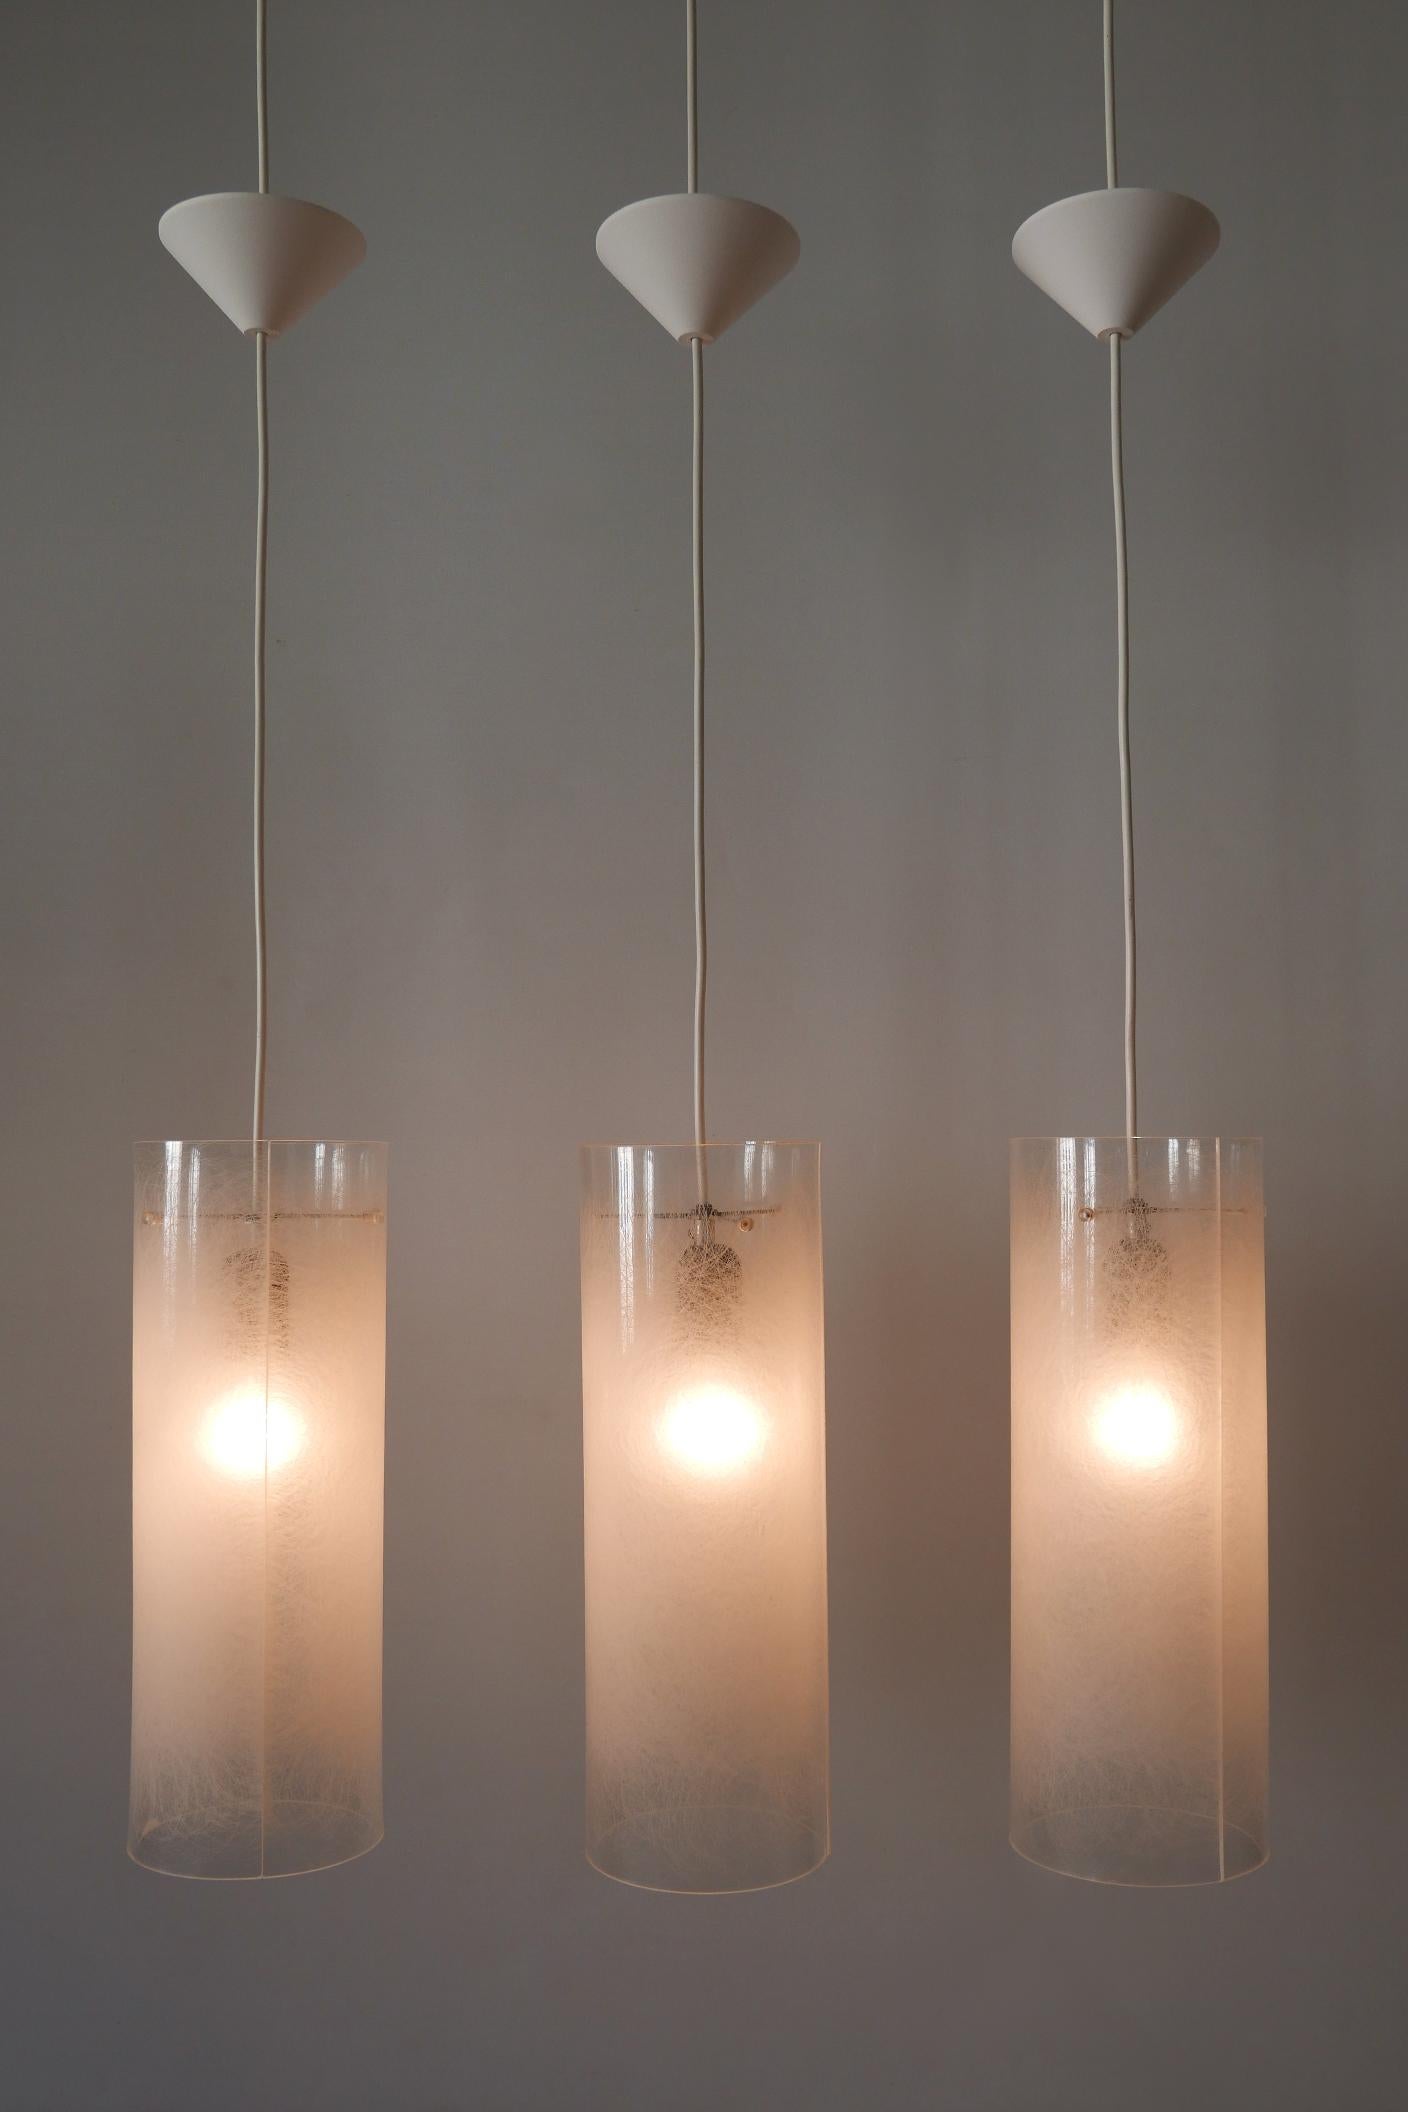 Set of three rare, lovely and elegant Mid-Century Modern pendant lamps or hanging lights. Manufactured probably by Rupert Nikoll, Austria, 1970s.

Executed in textured plexiglass and metal, each pendant lamp is executed with 1 x E27 / E26 Edison